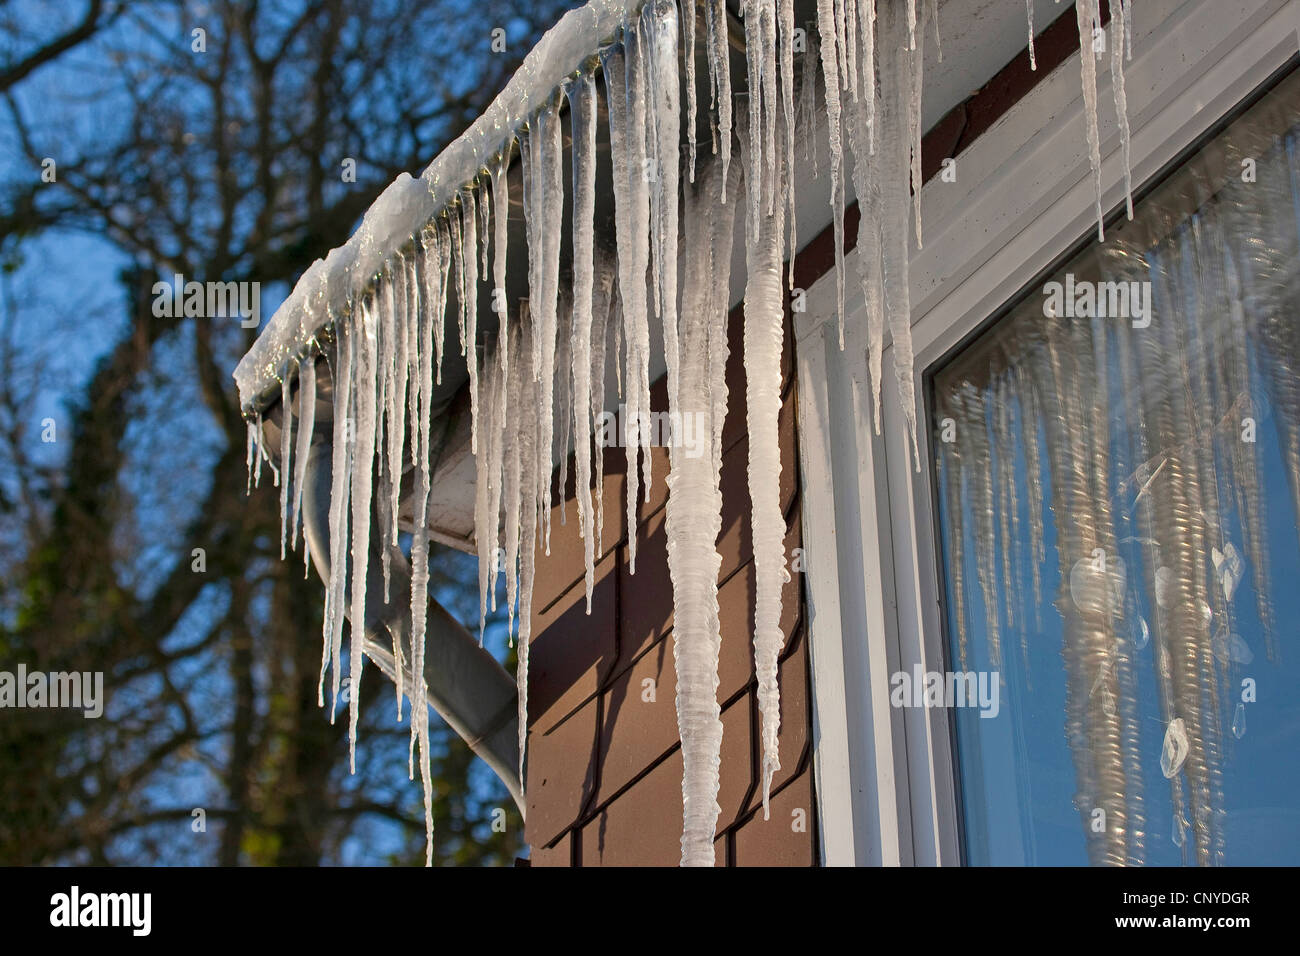 icicles at a roof gutter, Germany Stock Photo